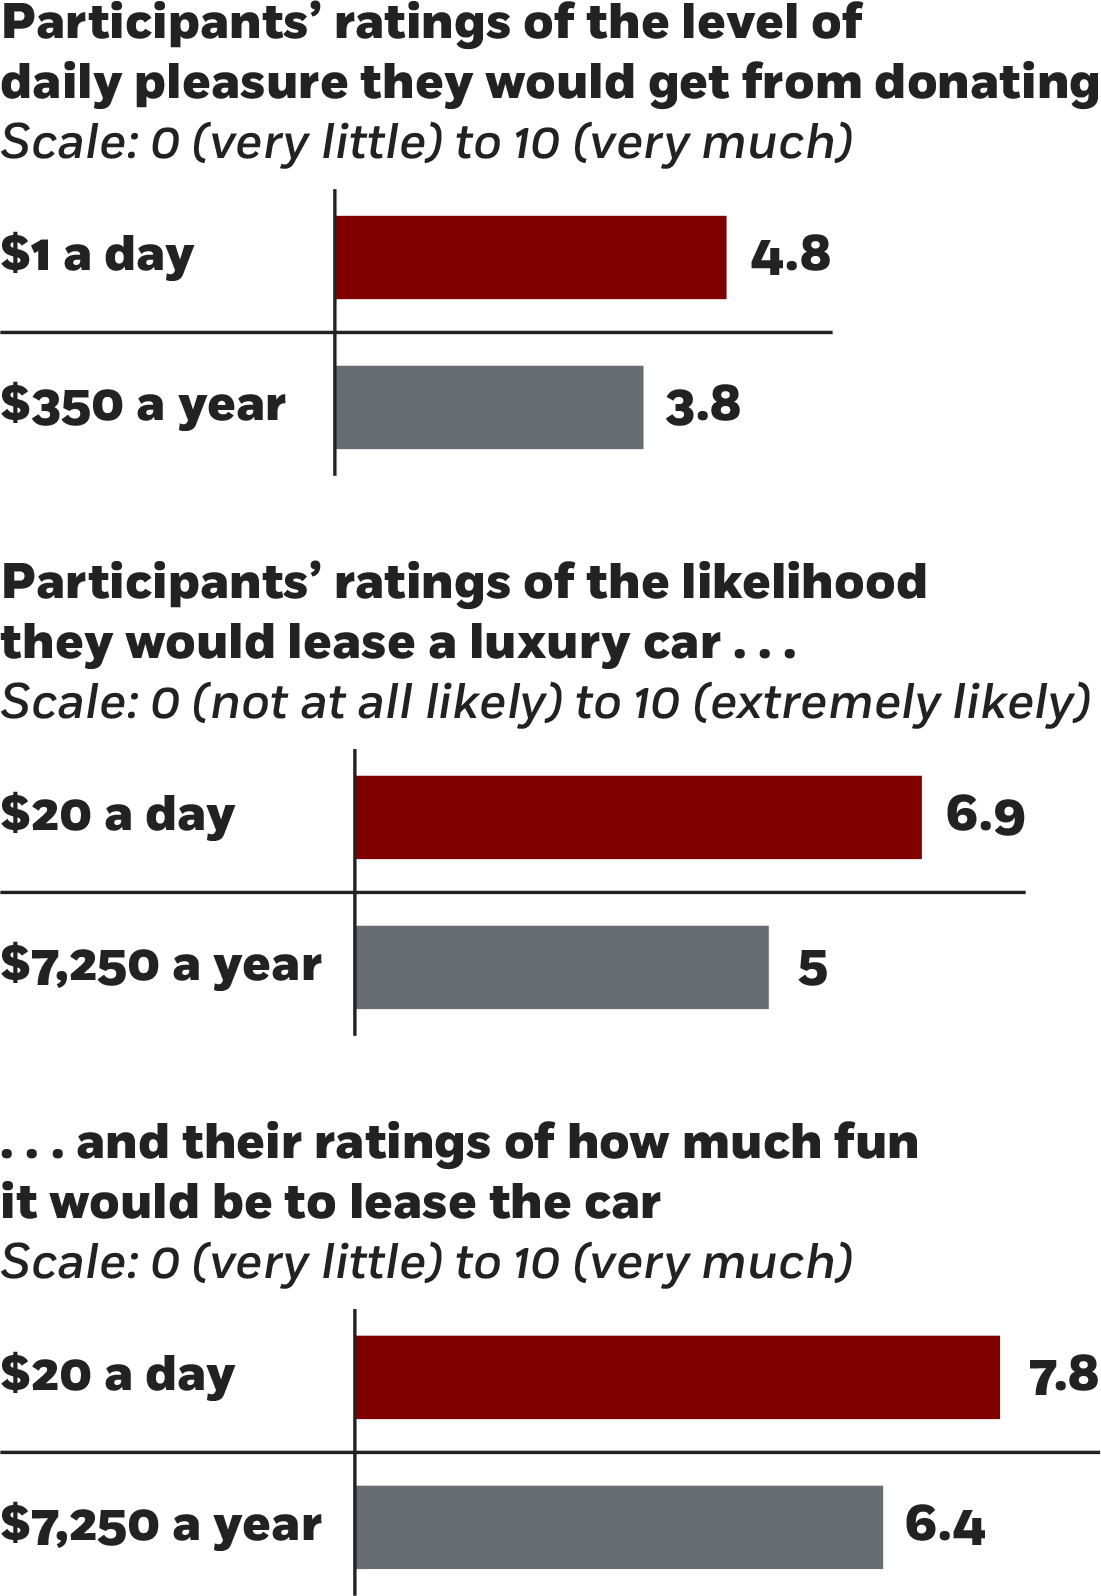 Three bar charts showing study participants’ ratings on a zero to ten scale. First, the pleasure of donating a dollar a day scored a four-point-eight rating, while donating three hundred fifty dollars a year got a three-point-eight. Second, the likelihood that they would lease a luxury car for twenty dollars a day got a six-point-nine, while doing it for seven thousand two hundred fifty dollars a year got a rating of five. And their corresponding ratings of how much fun it would be to lease the luxury car got a seven-point-eight and a six-point-four.